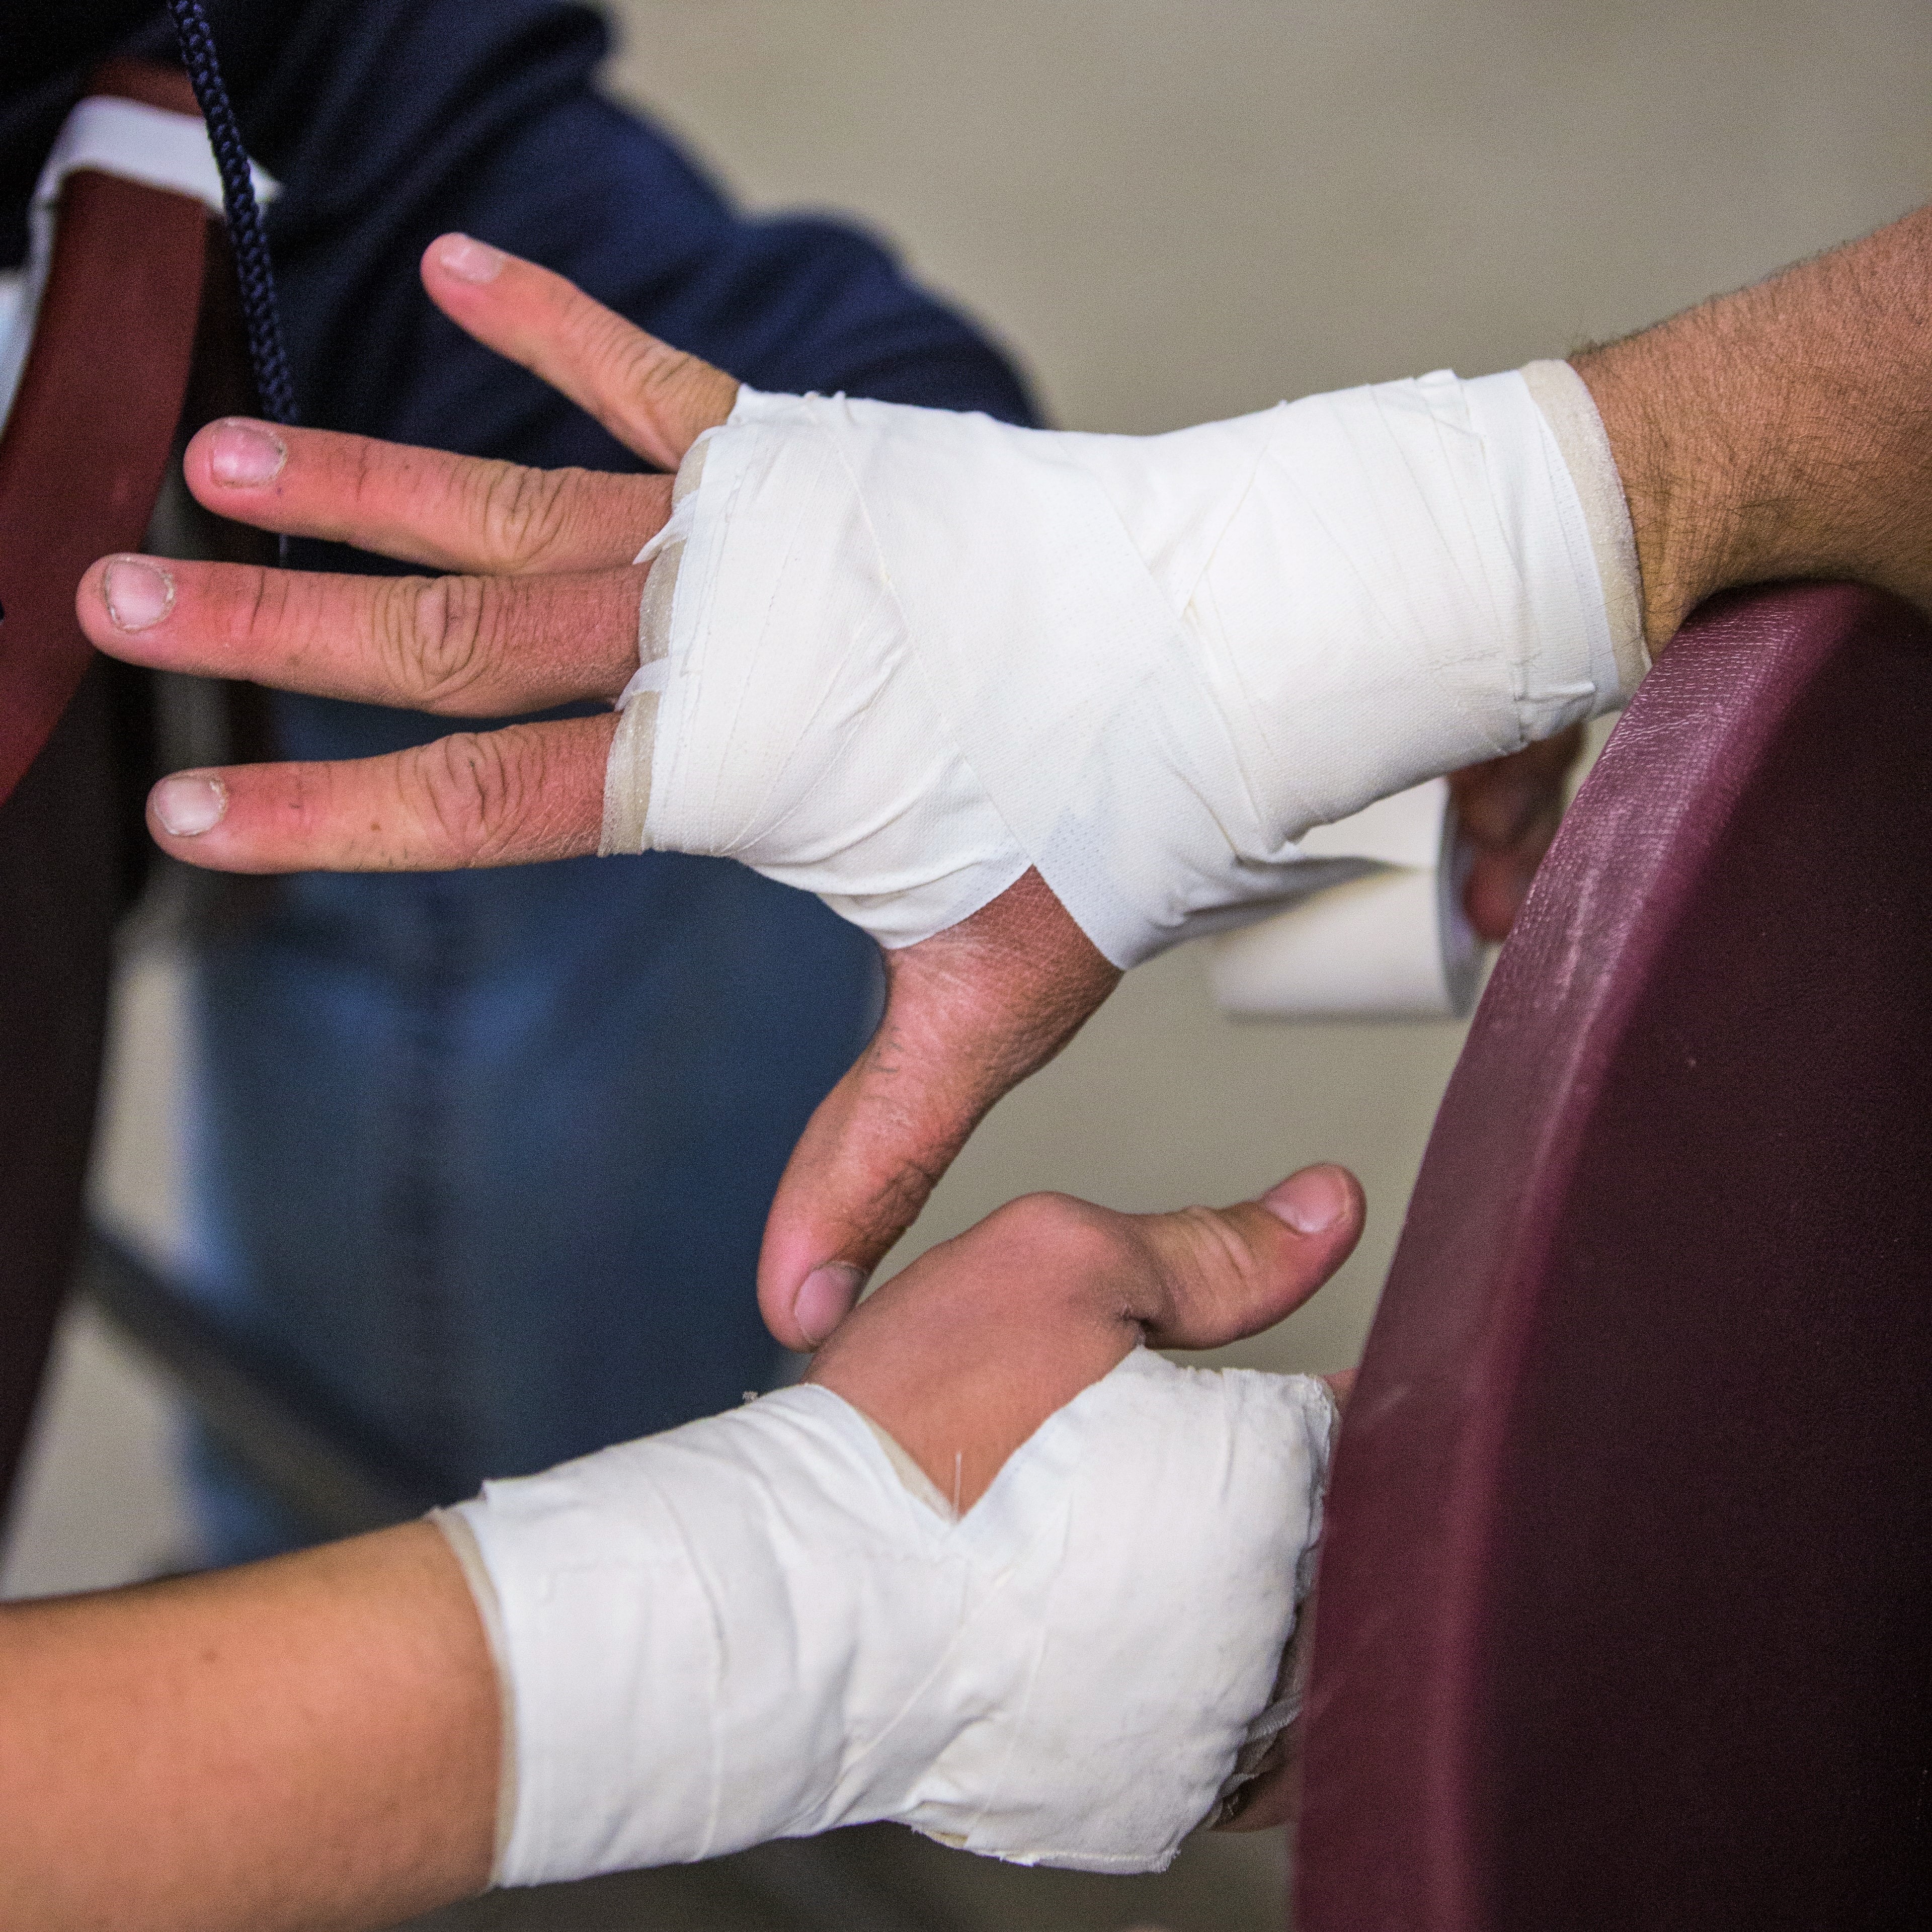 Bandaged hands, showing importance of workers' comp and PPE for home inspectors